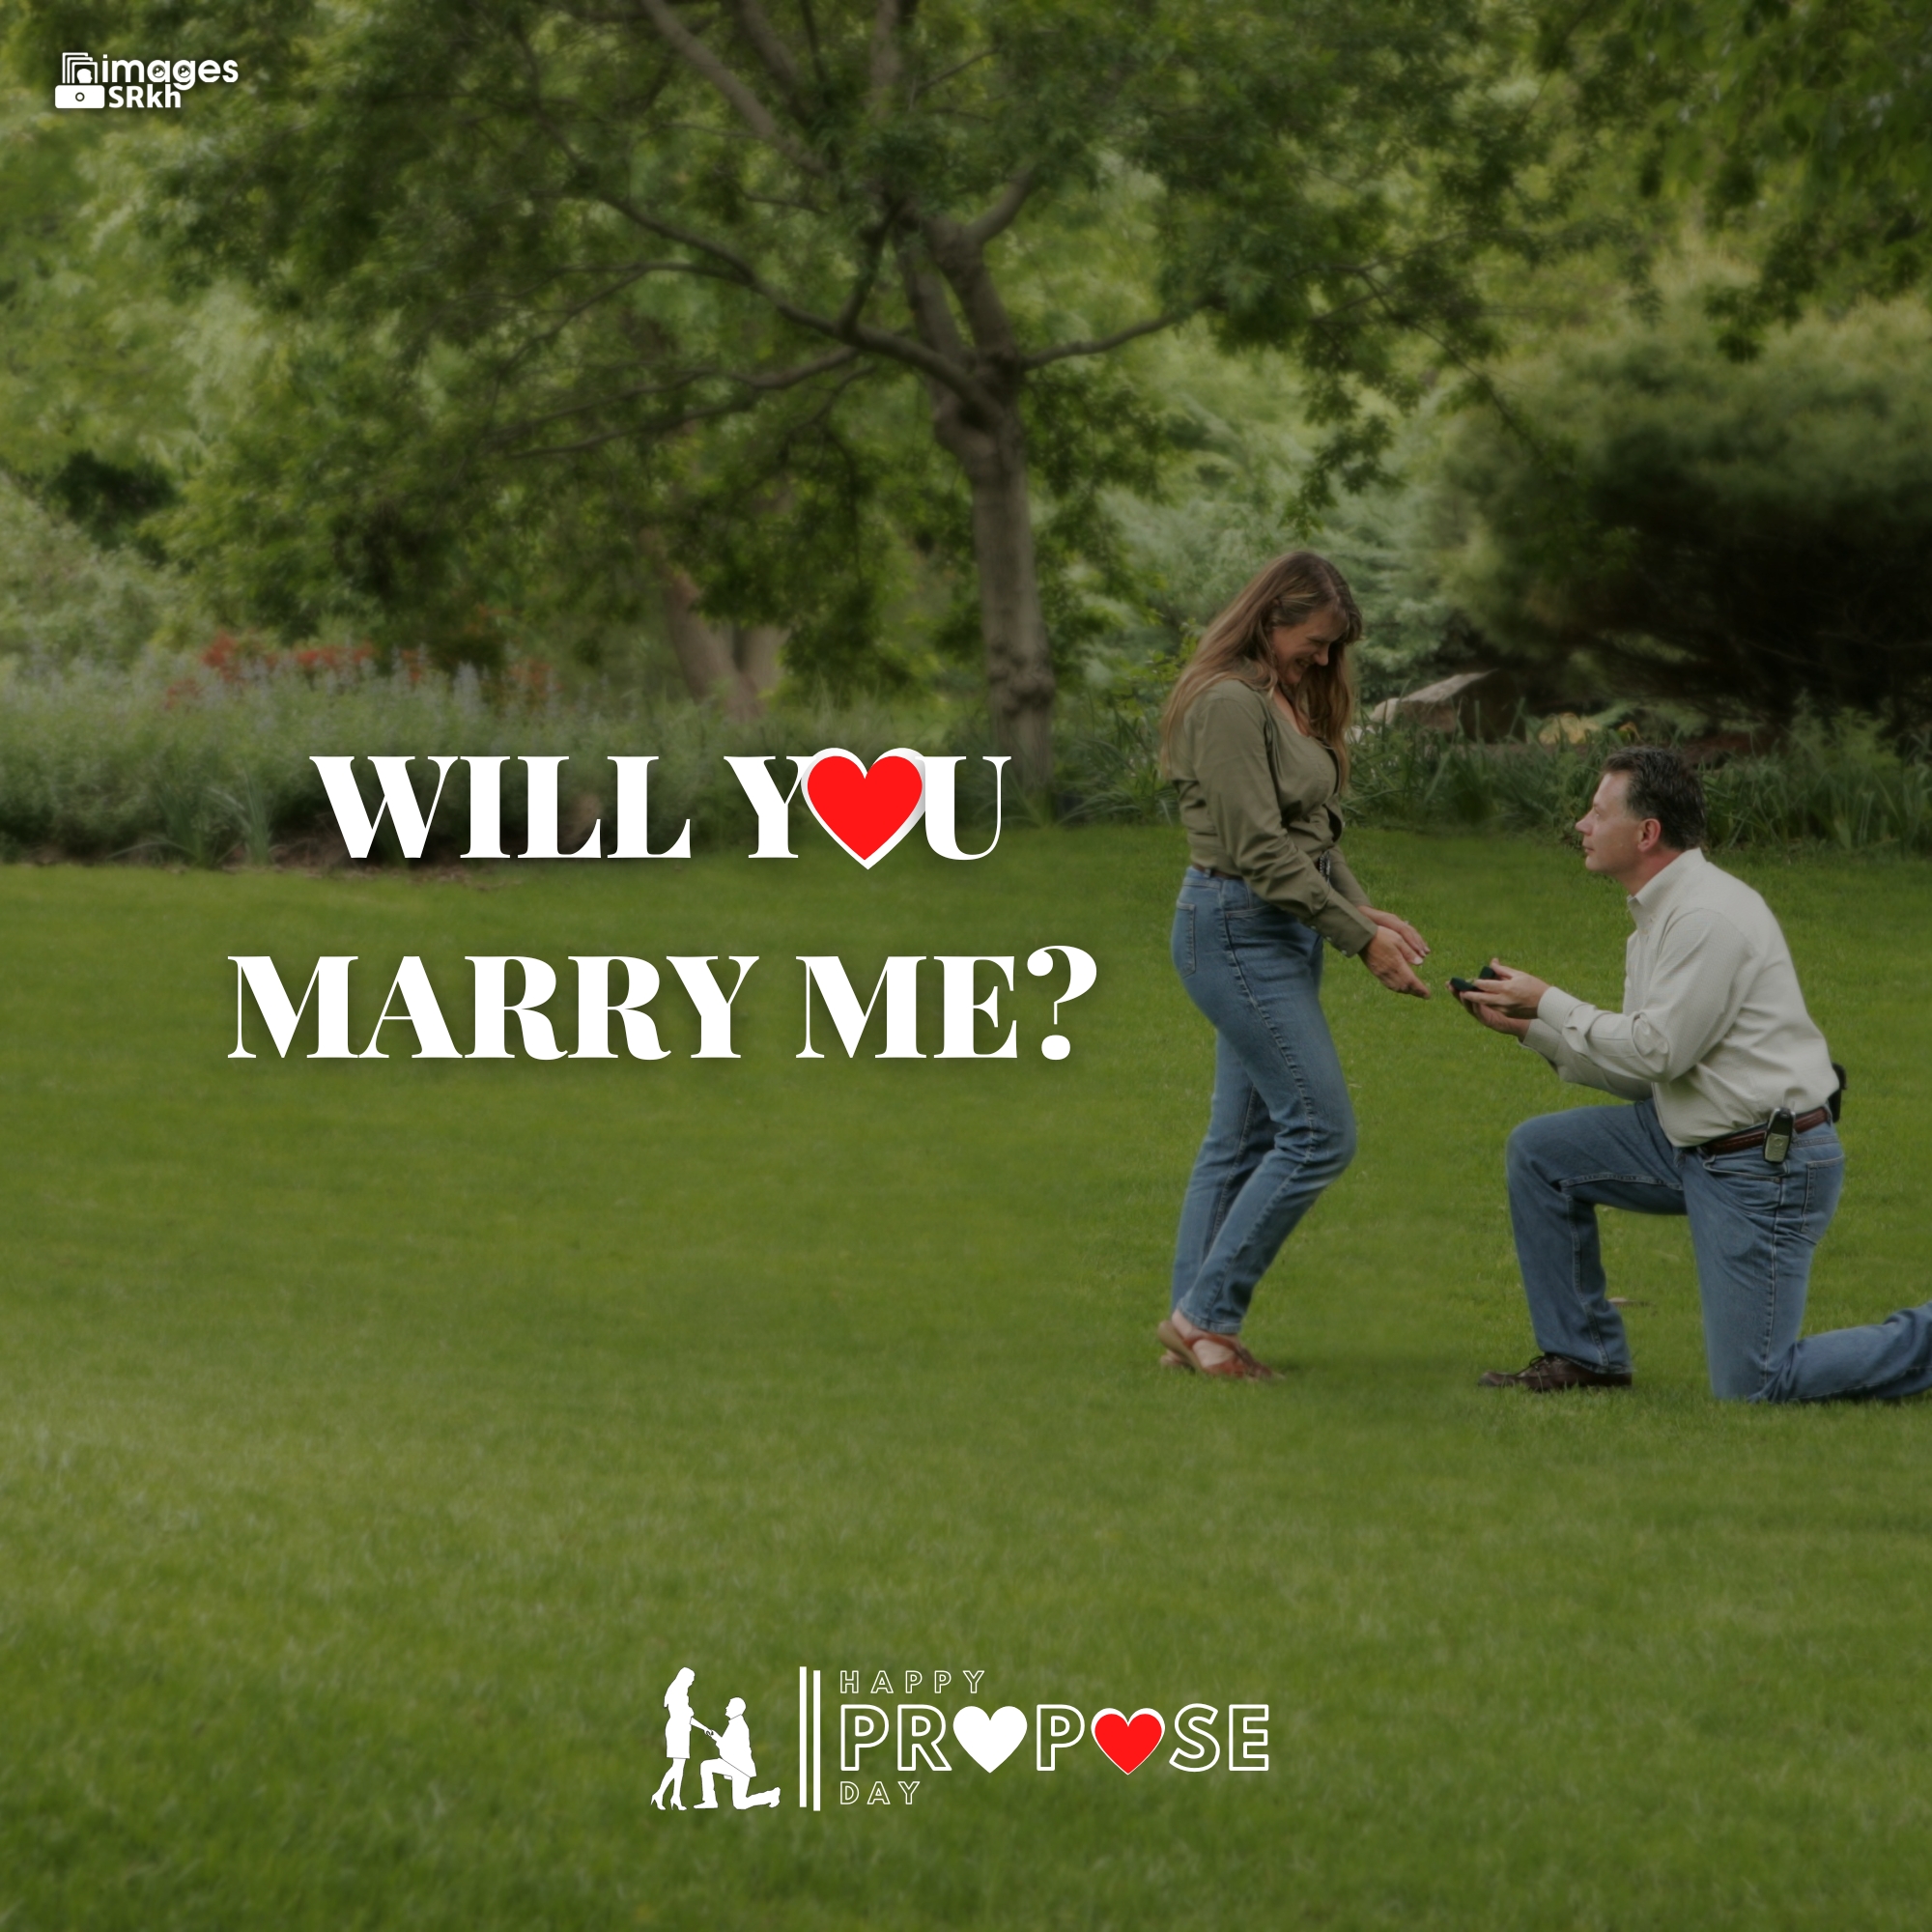 Propose Day Images | 266 | Will You MARRY ME